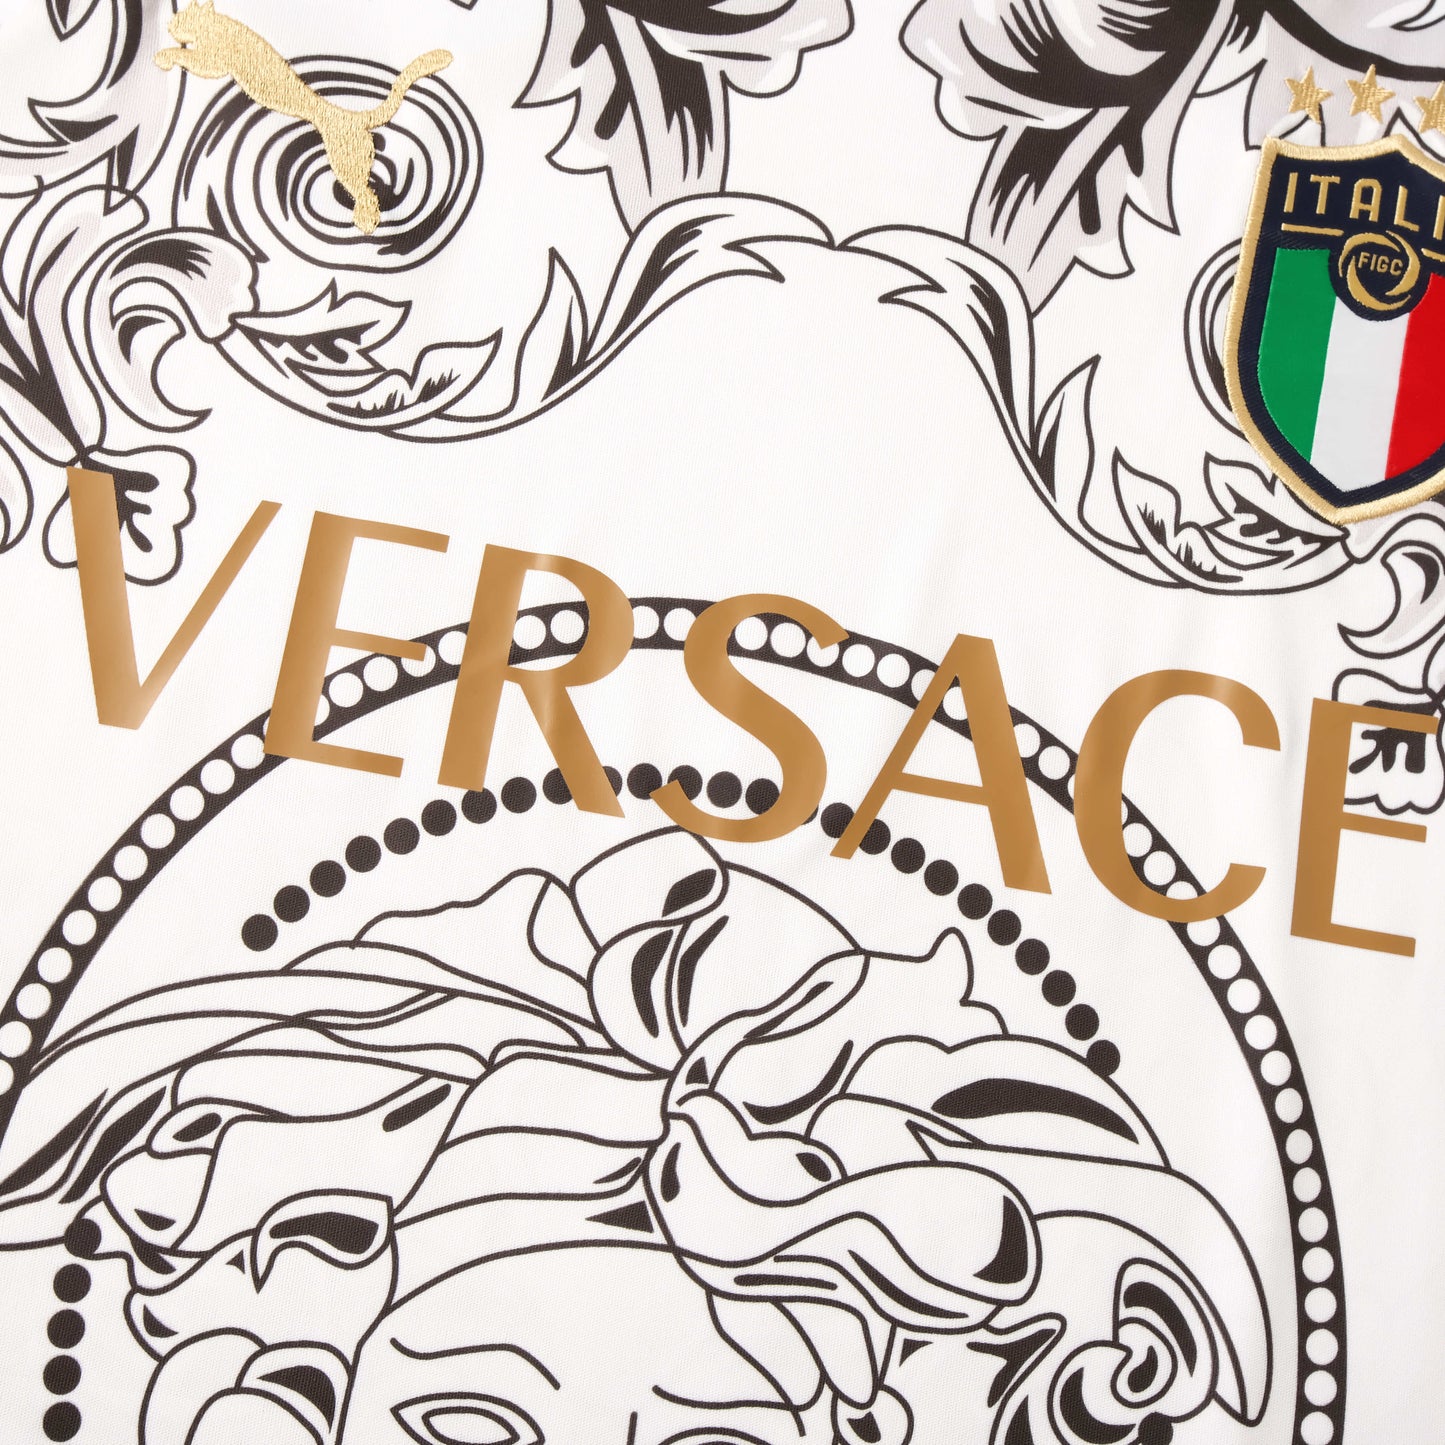 Italy 23/24 "White Versace" Jersey